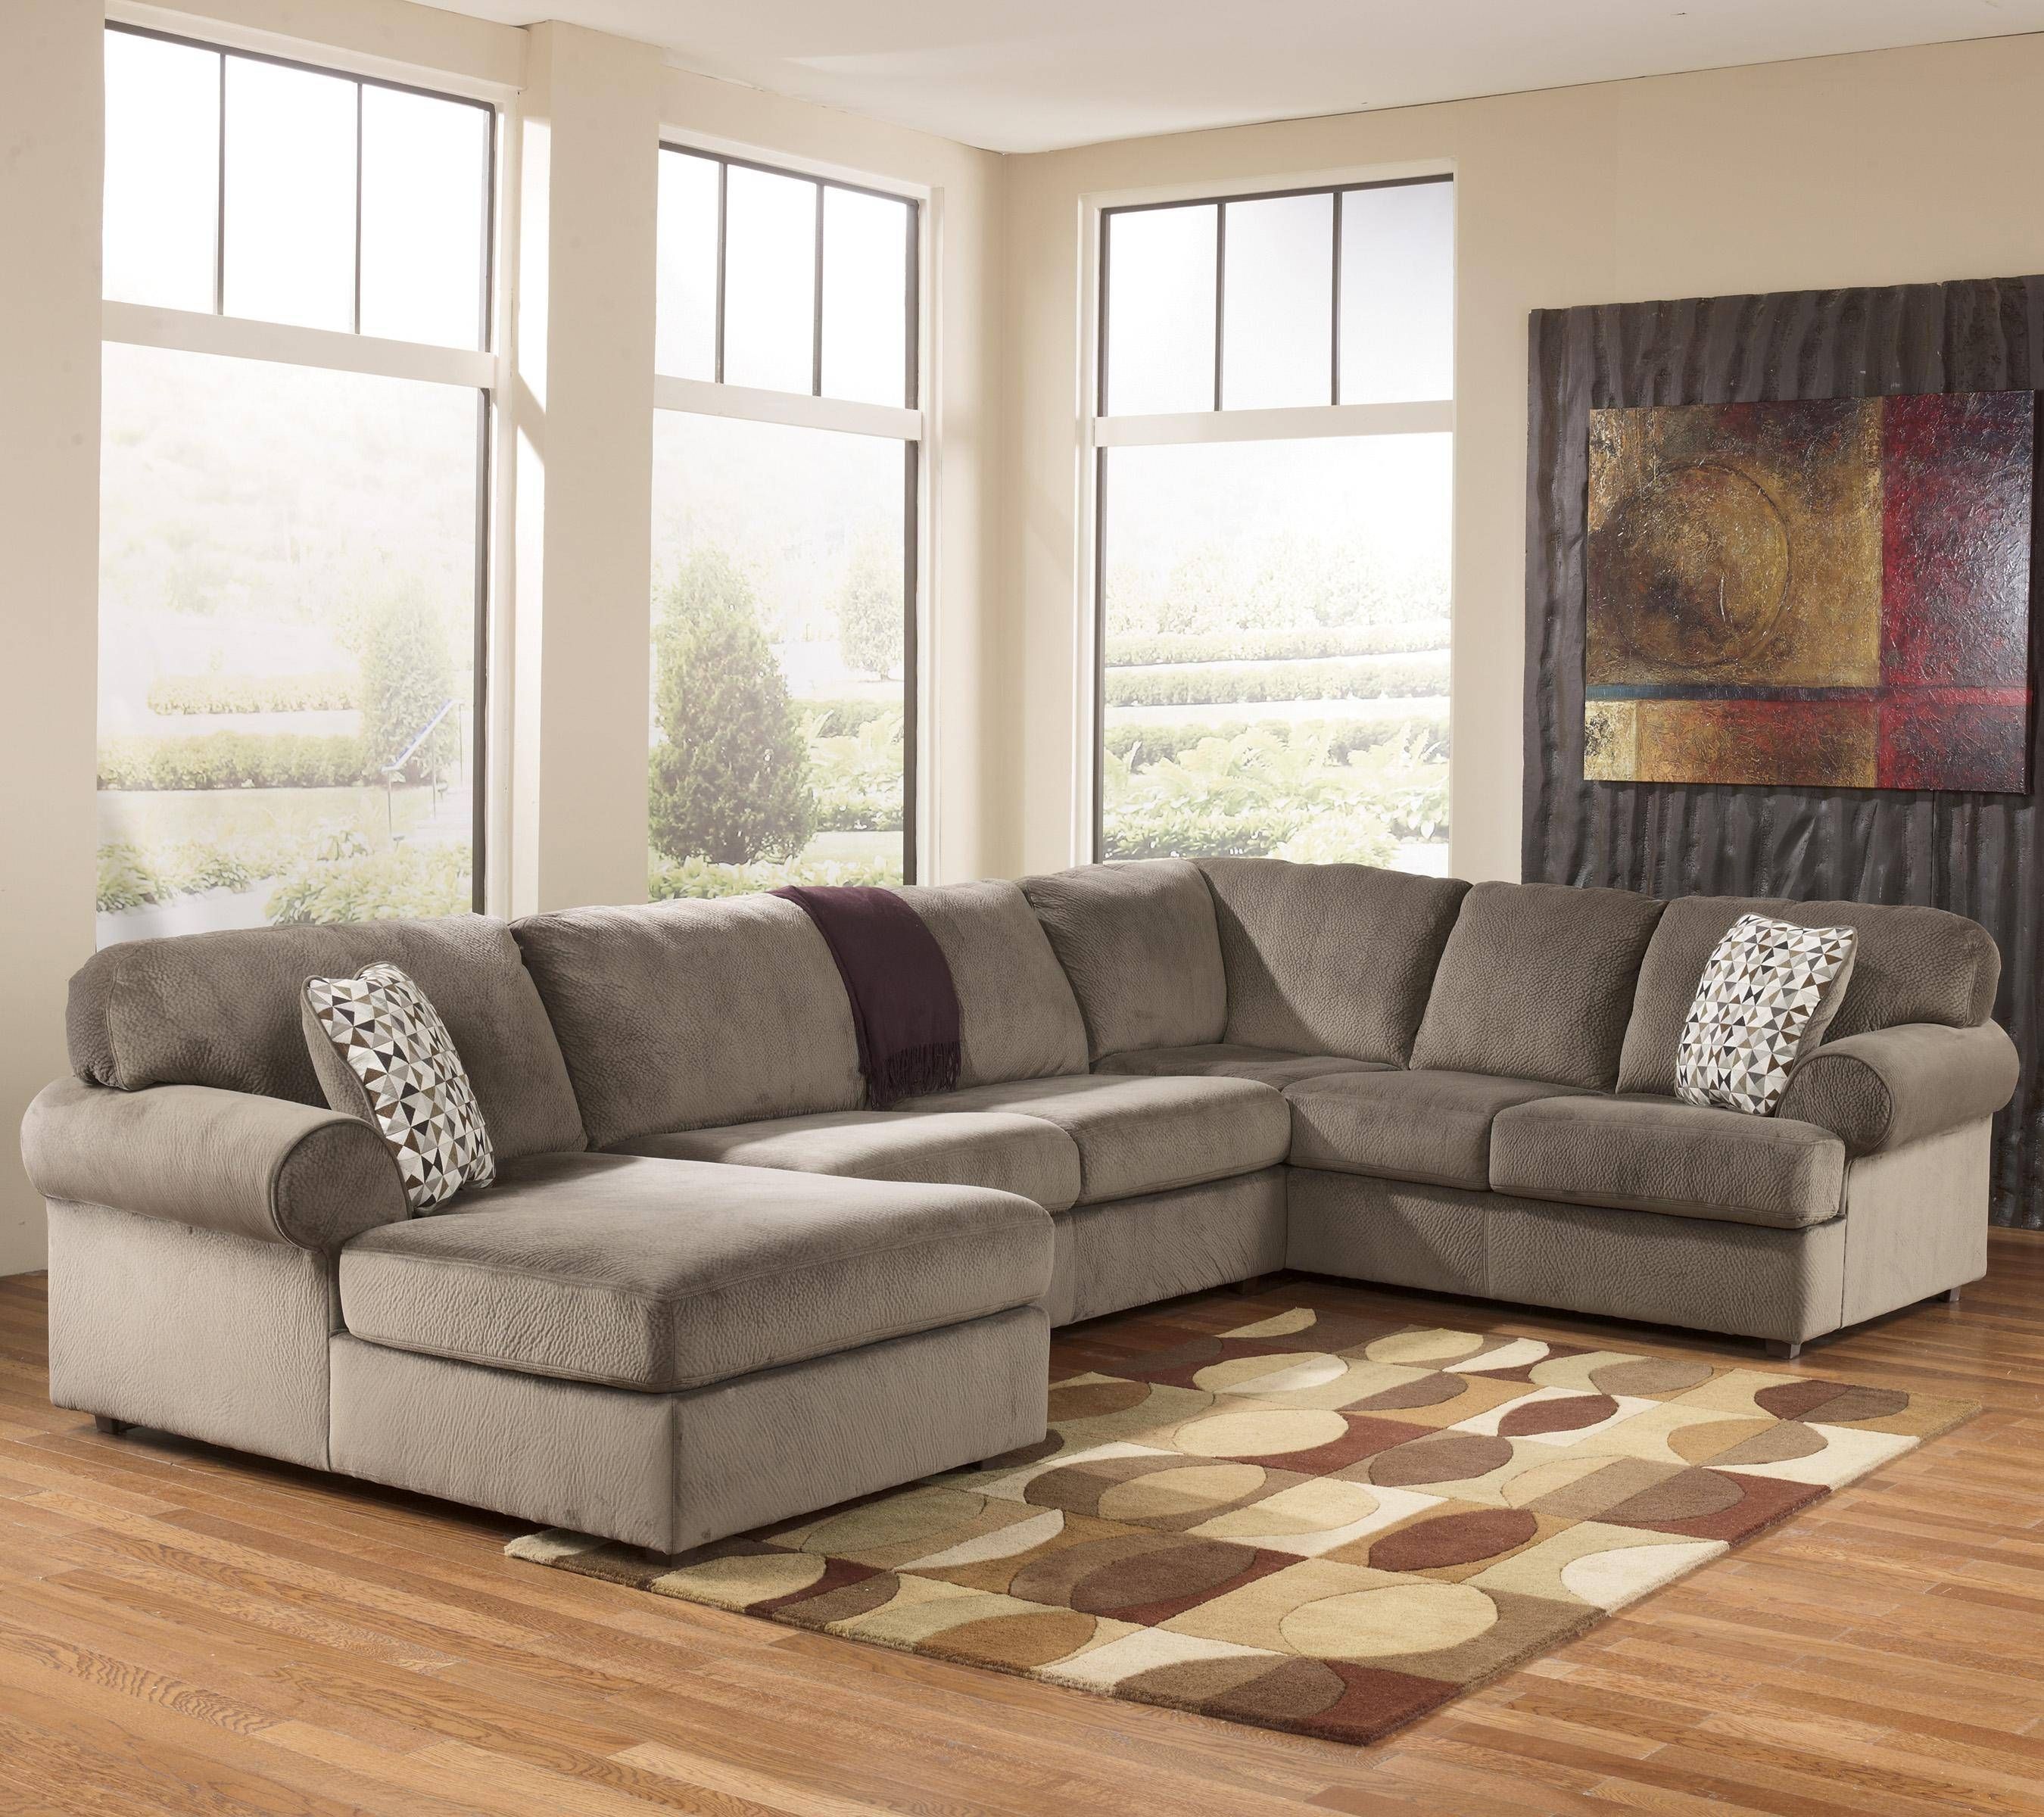 Chair & Sofa: Sectional Sofas At Ashley Furniture | Ashley Regarding Sectional Sofas Ashley Furniture (View 11 of 15)